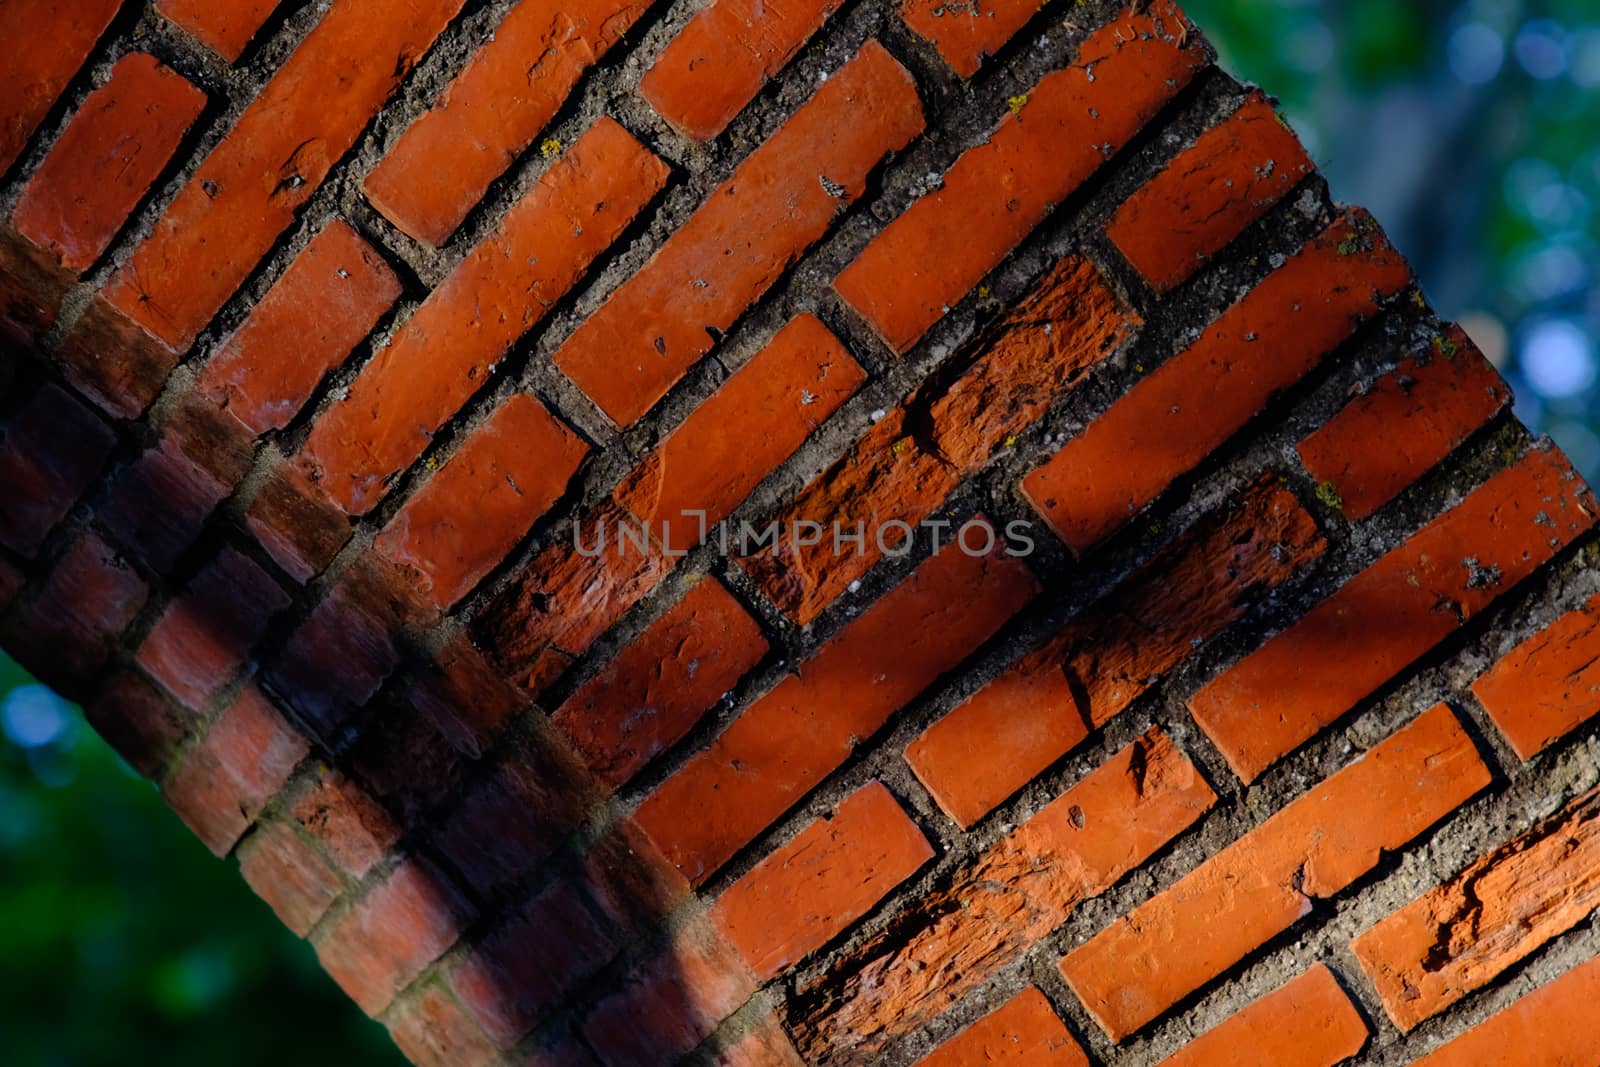 Part of a decorative arc made of bricks in Pamplona, Spain by mikelju